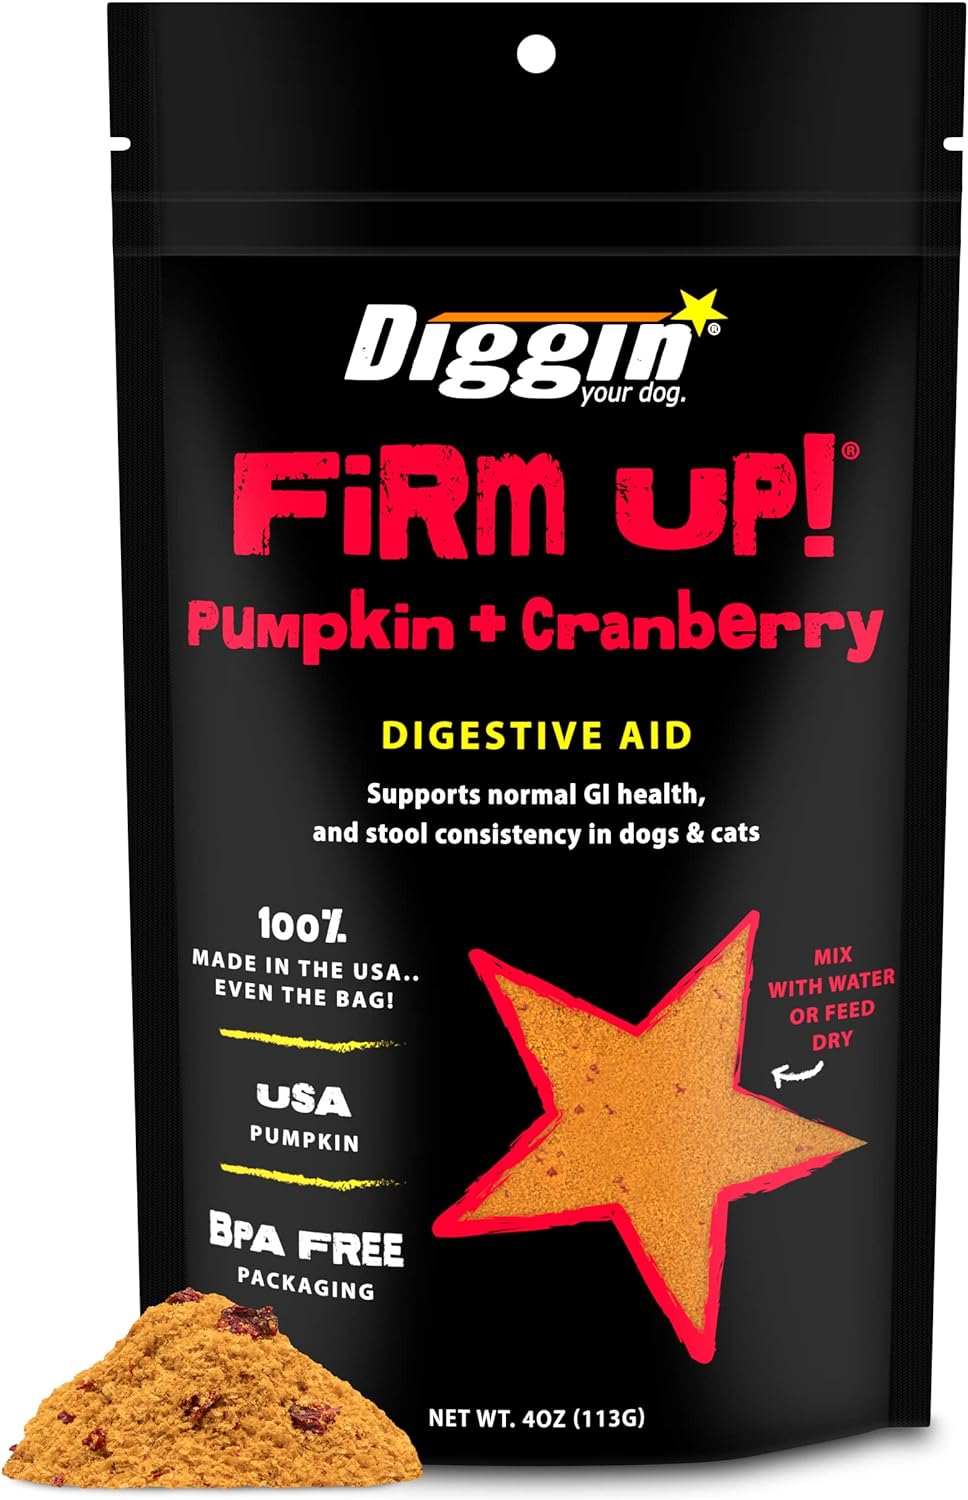 Diggin’ Your Dog Firm Up Pumpkin for Dogs & Cats with Cranberry, 100% Made in USA, Pumpkin Powder for Dogs, Digestive Support, Apple Pectin, Fiber, Healthy Stool, 4 oz